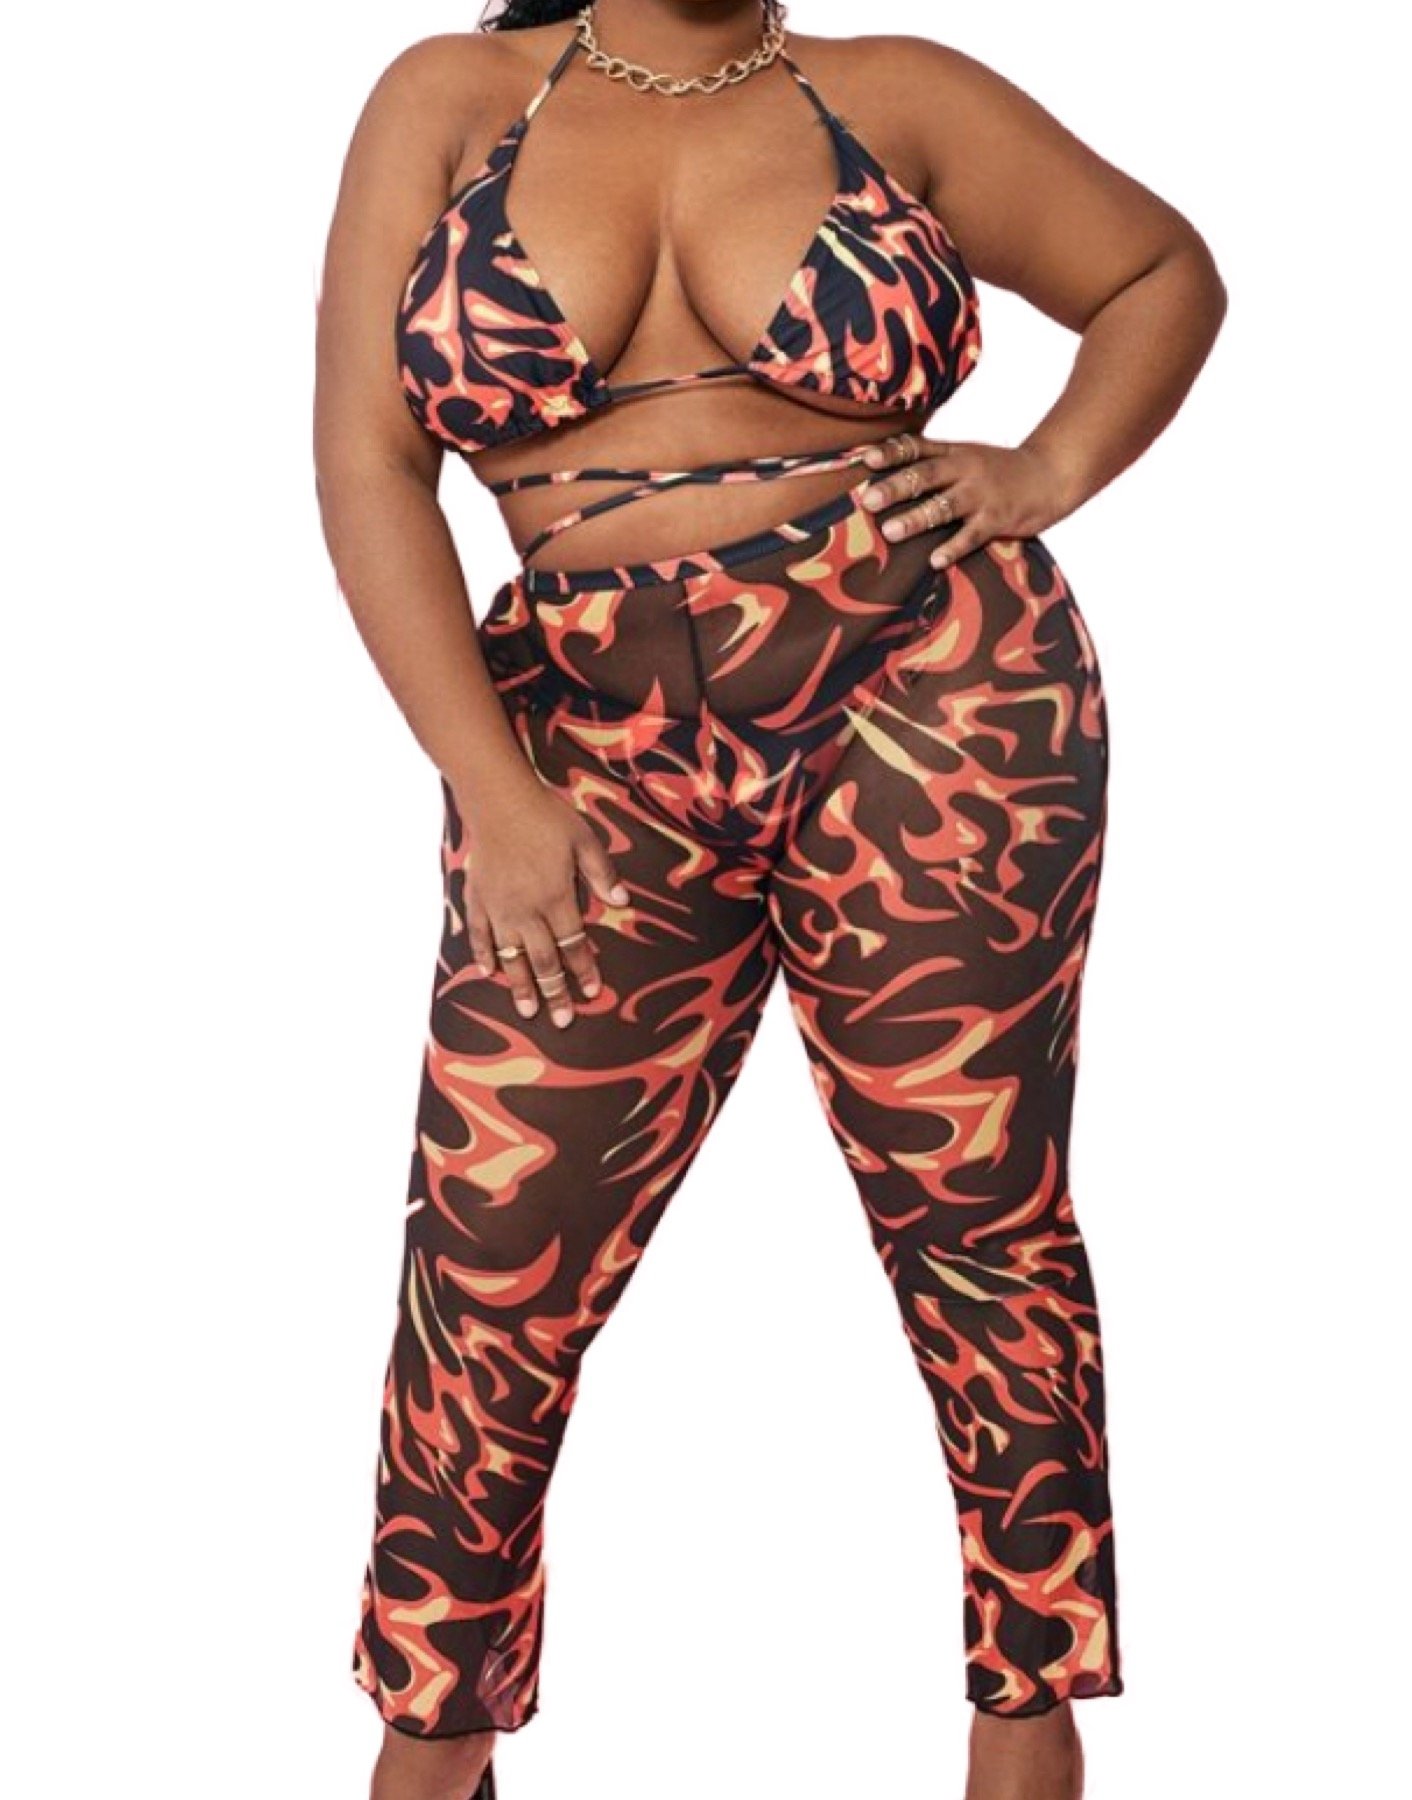 Image of “Flames on” 3 Piece Swimsuit 